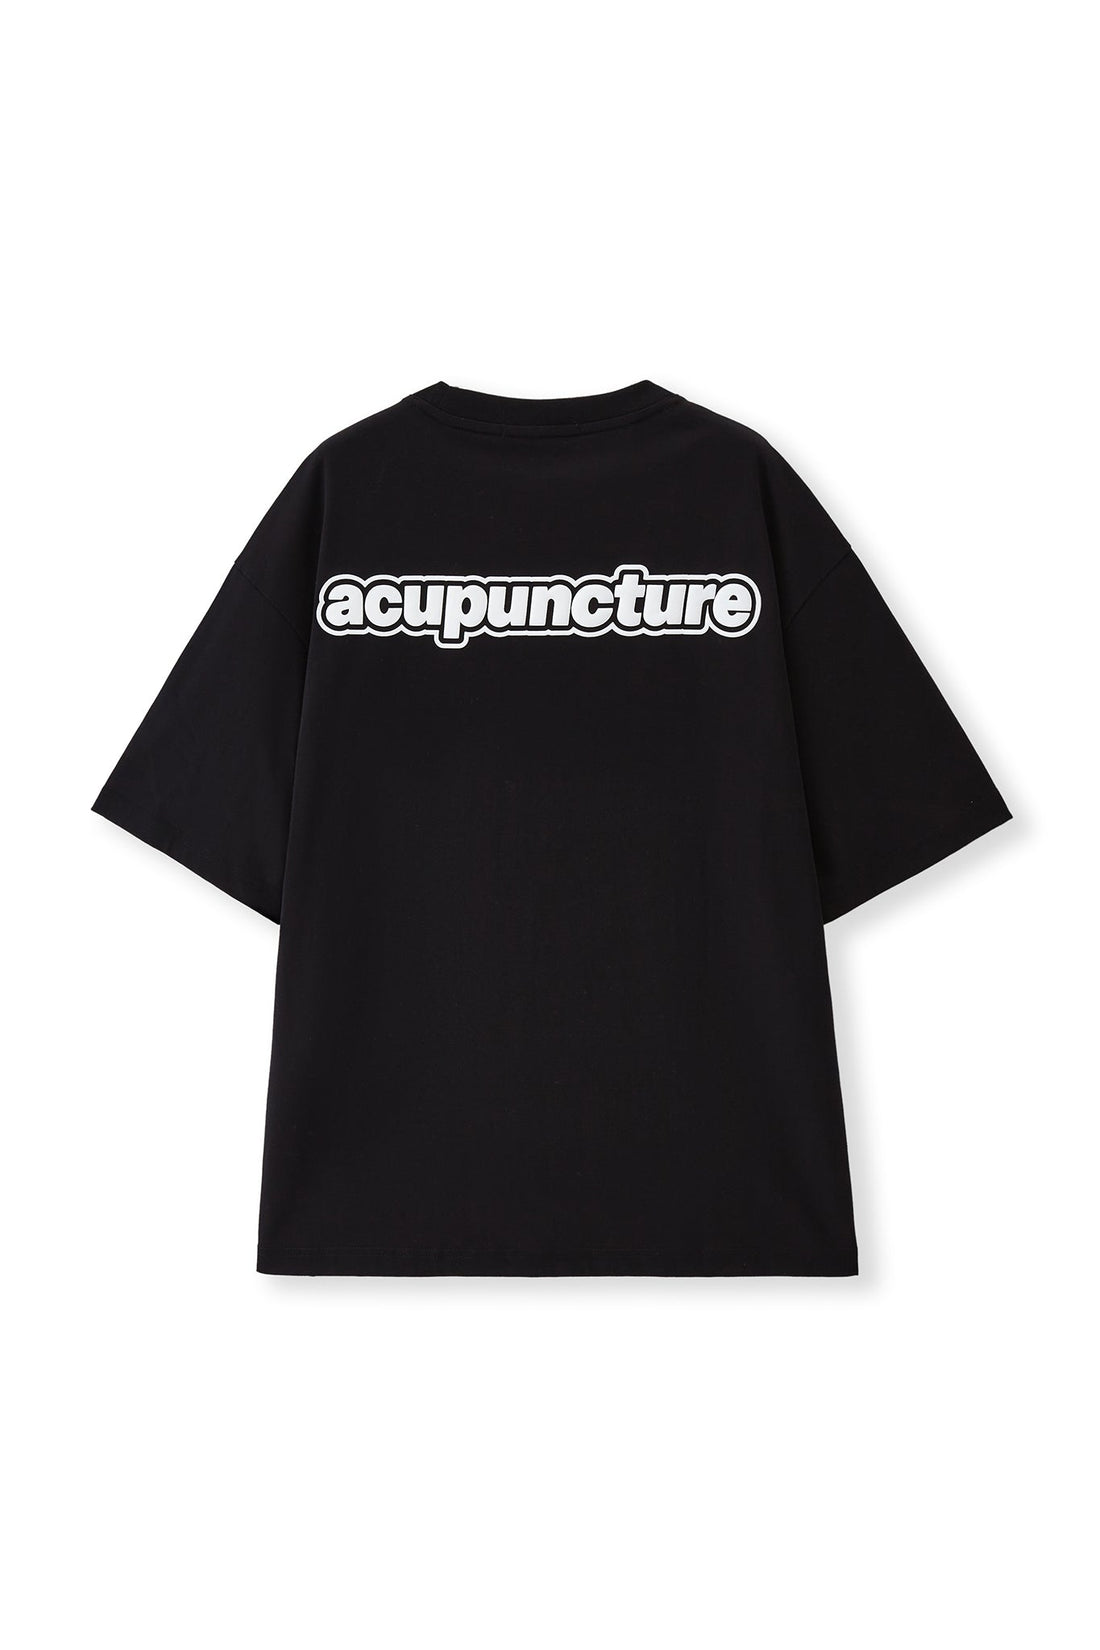 THE EARTH TSHIRT BLACK Acupuncture